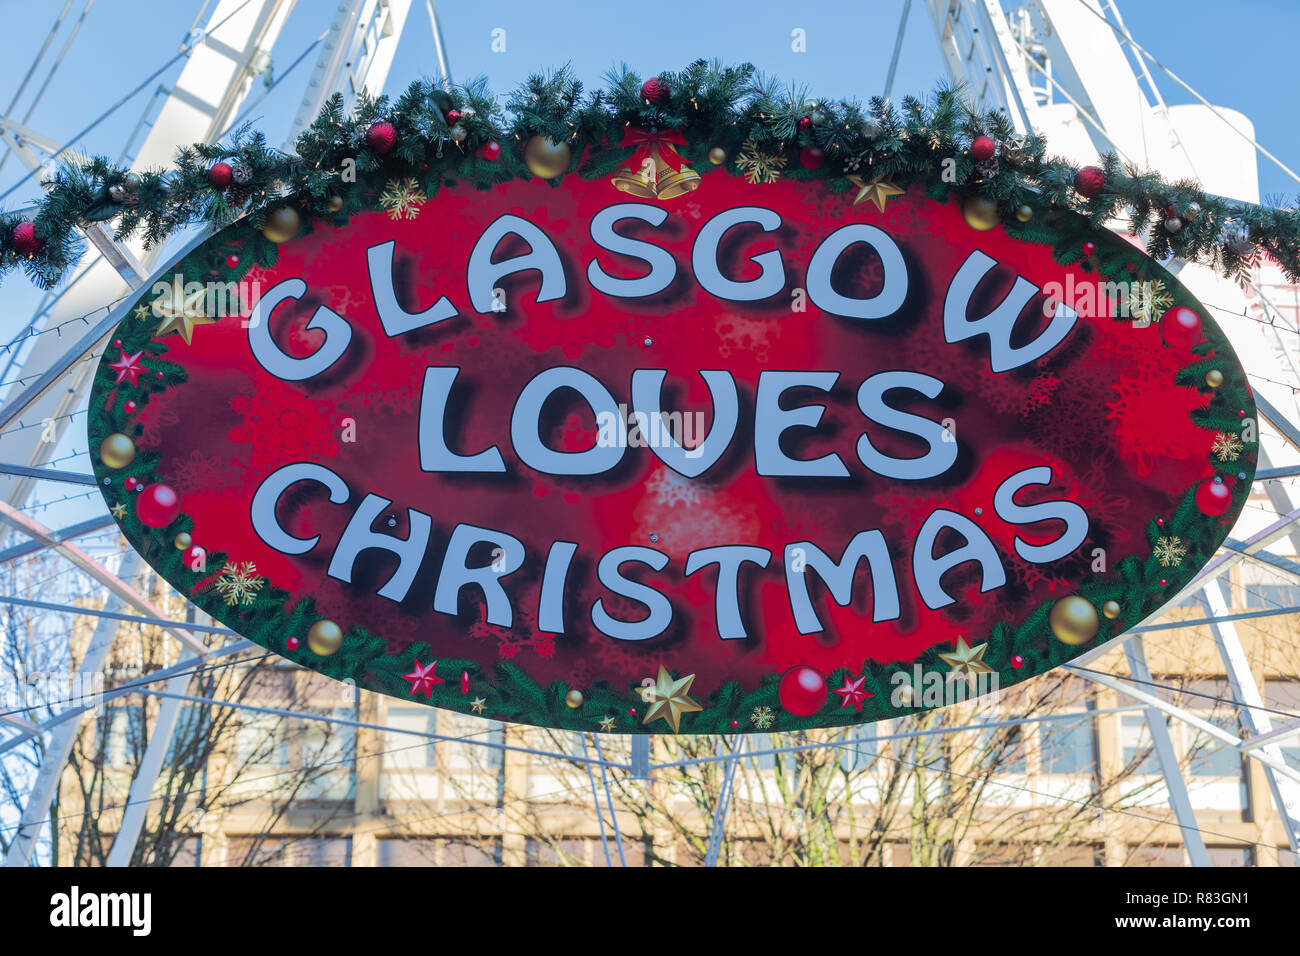 Glasgow Loves Christmas sign at the Christmas market at George Square Glasgow Stock Photo